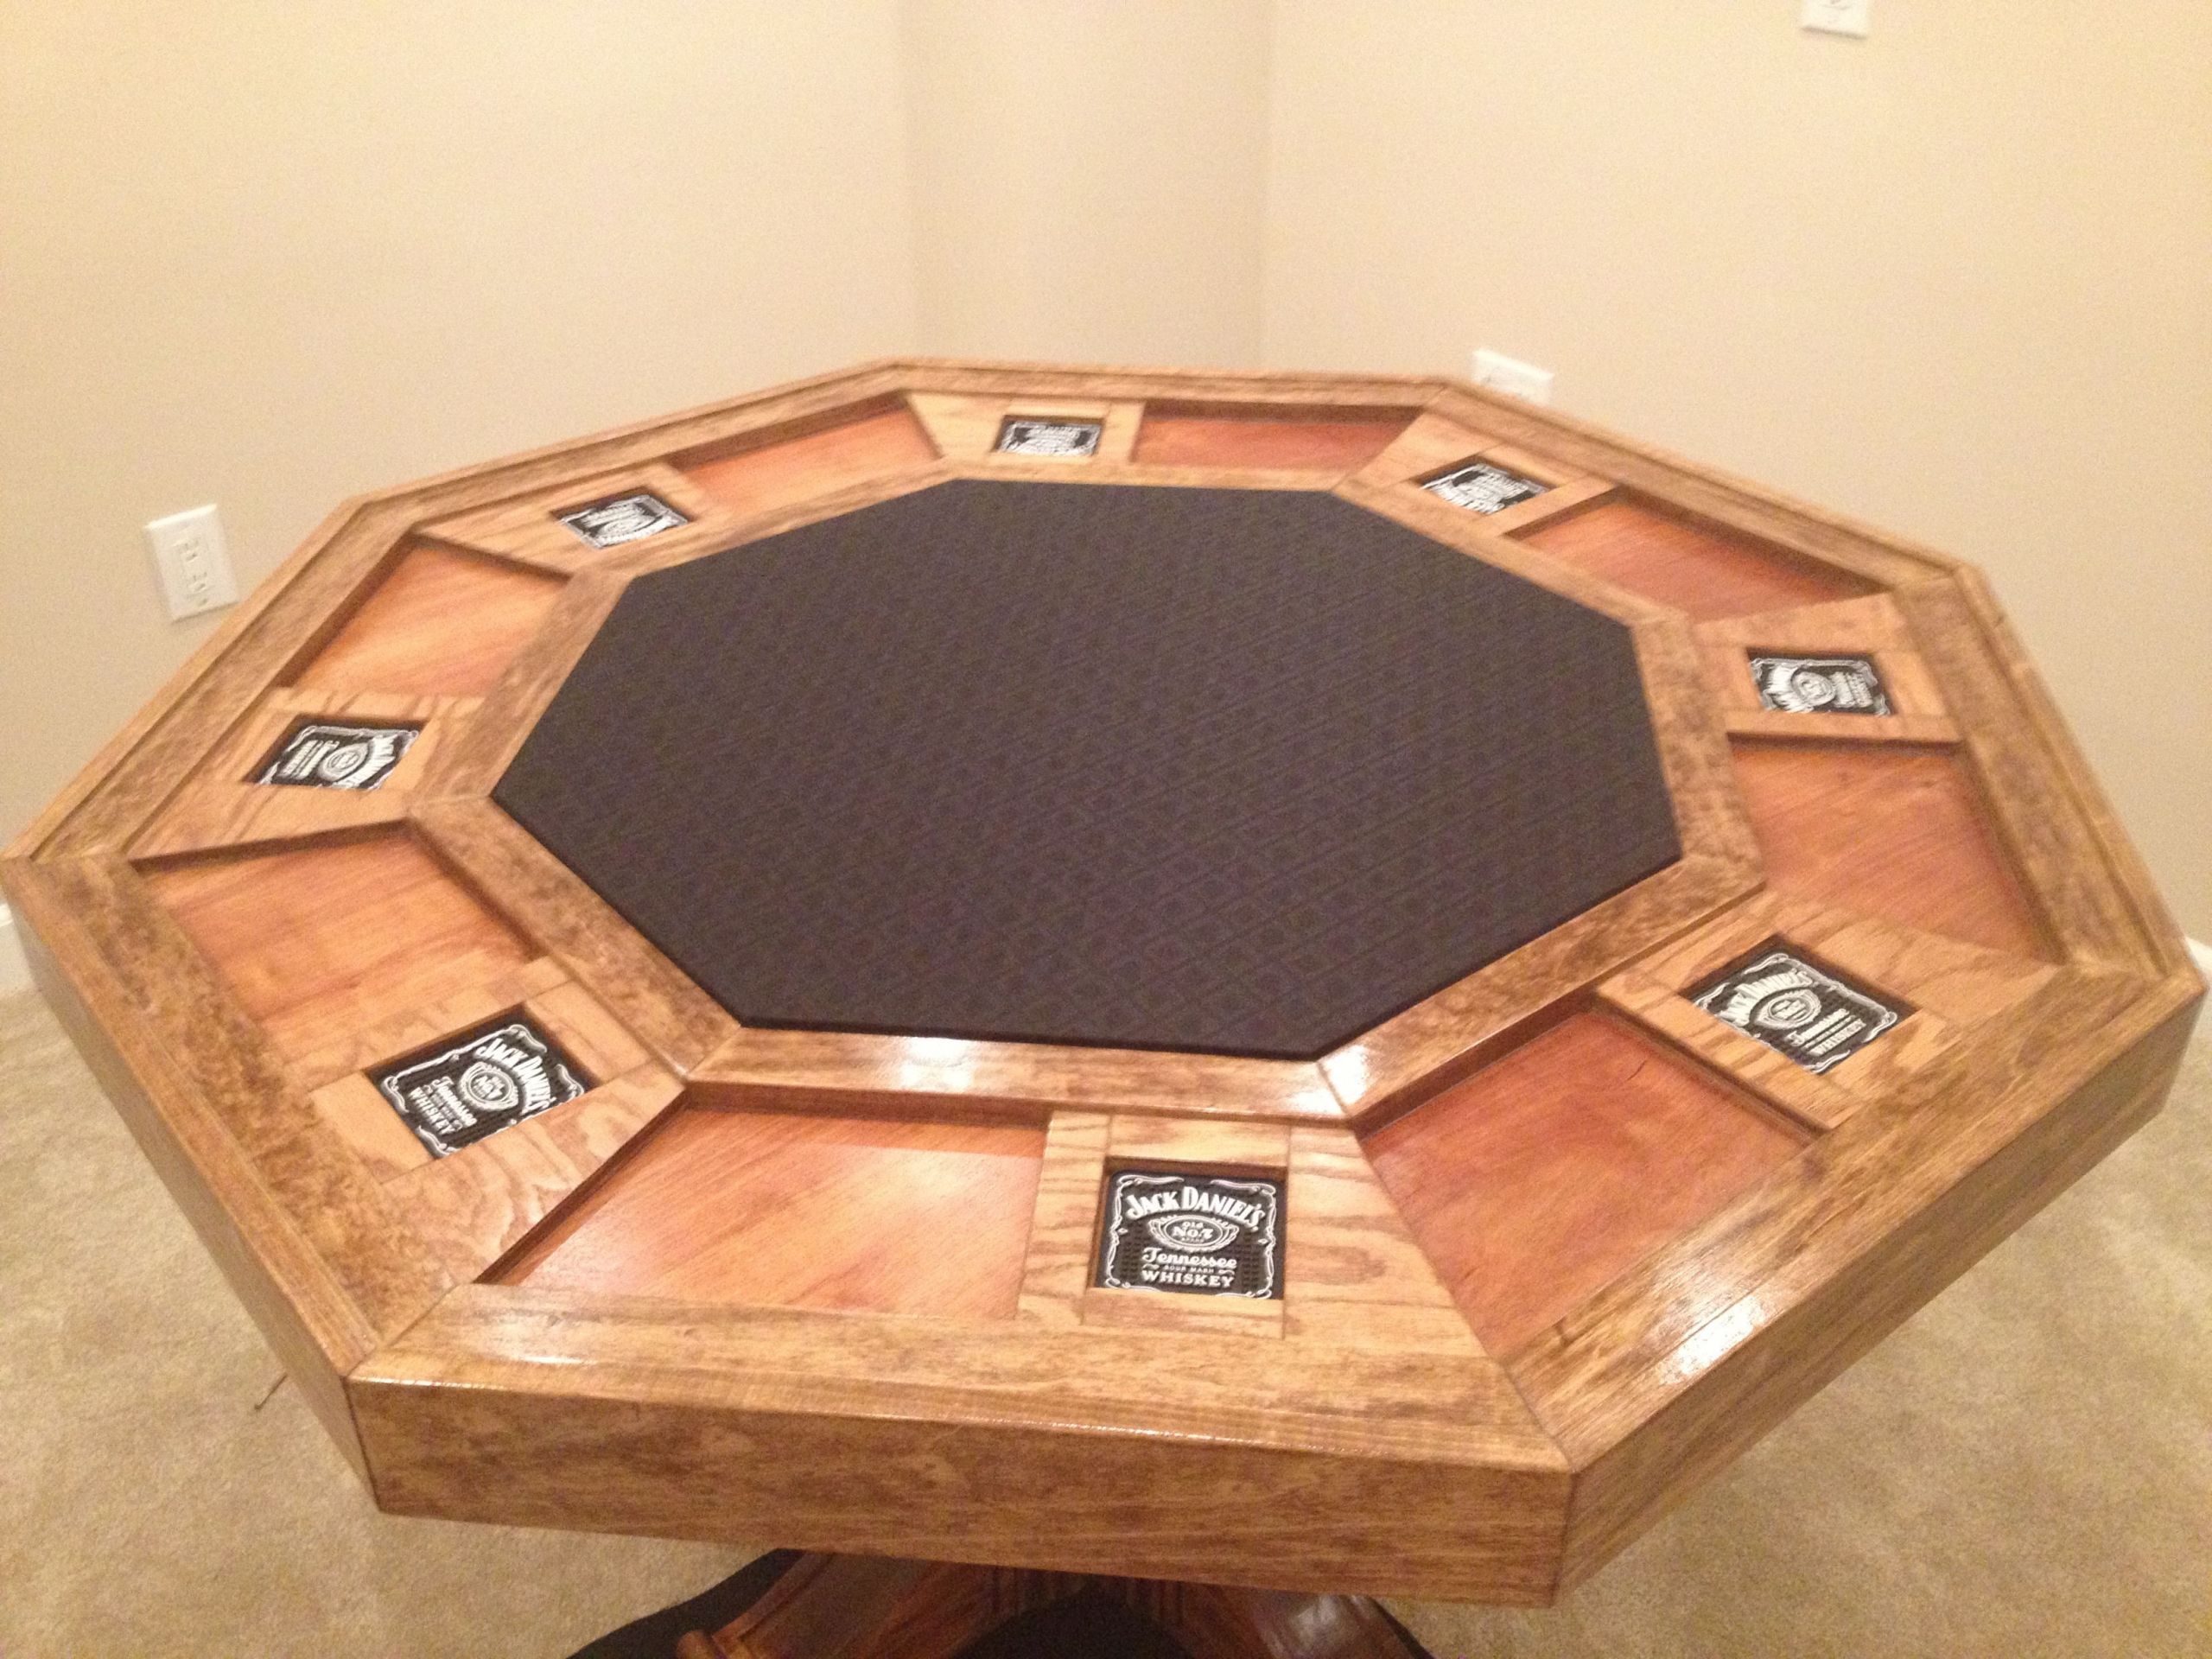 DIY Poker Table Plans
 Top of my homemade table